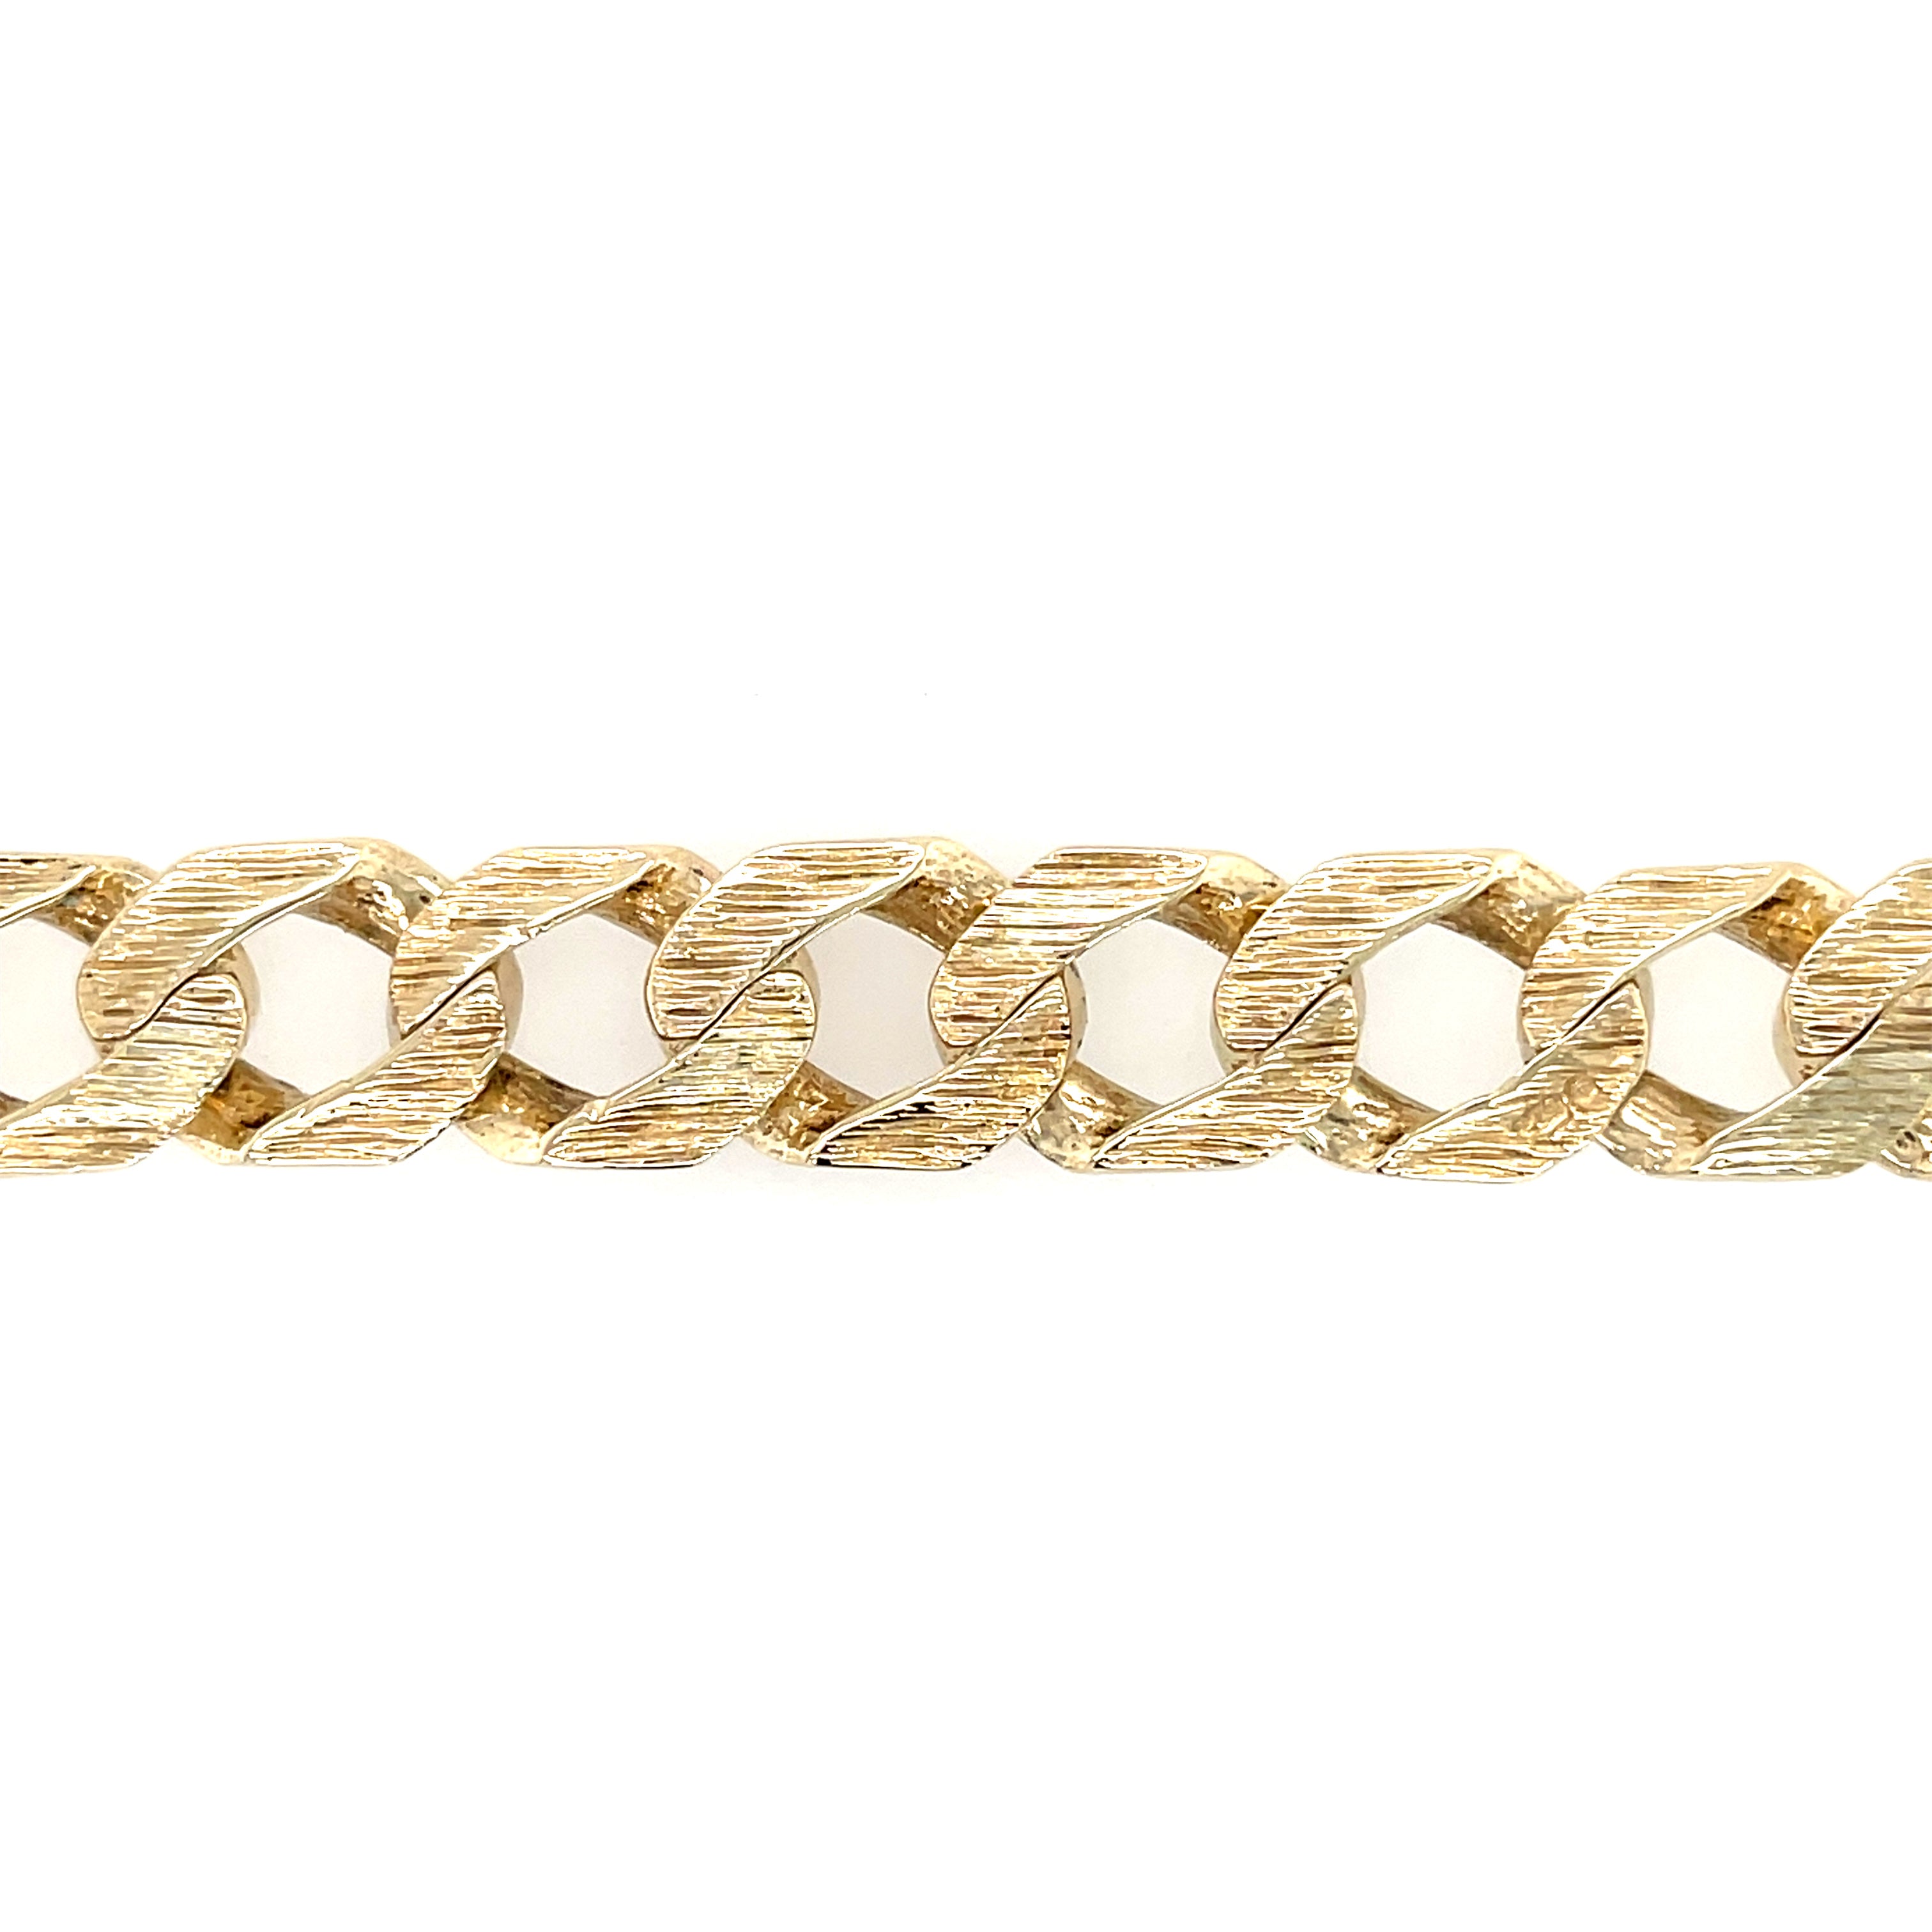 9ct Yellow Gold 8 Inch Patterned & Bark Effect Curb Bracelet - 31.80g